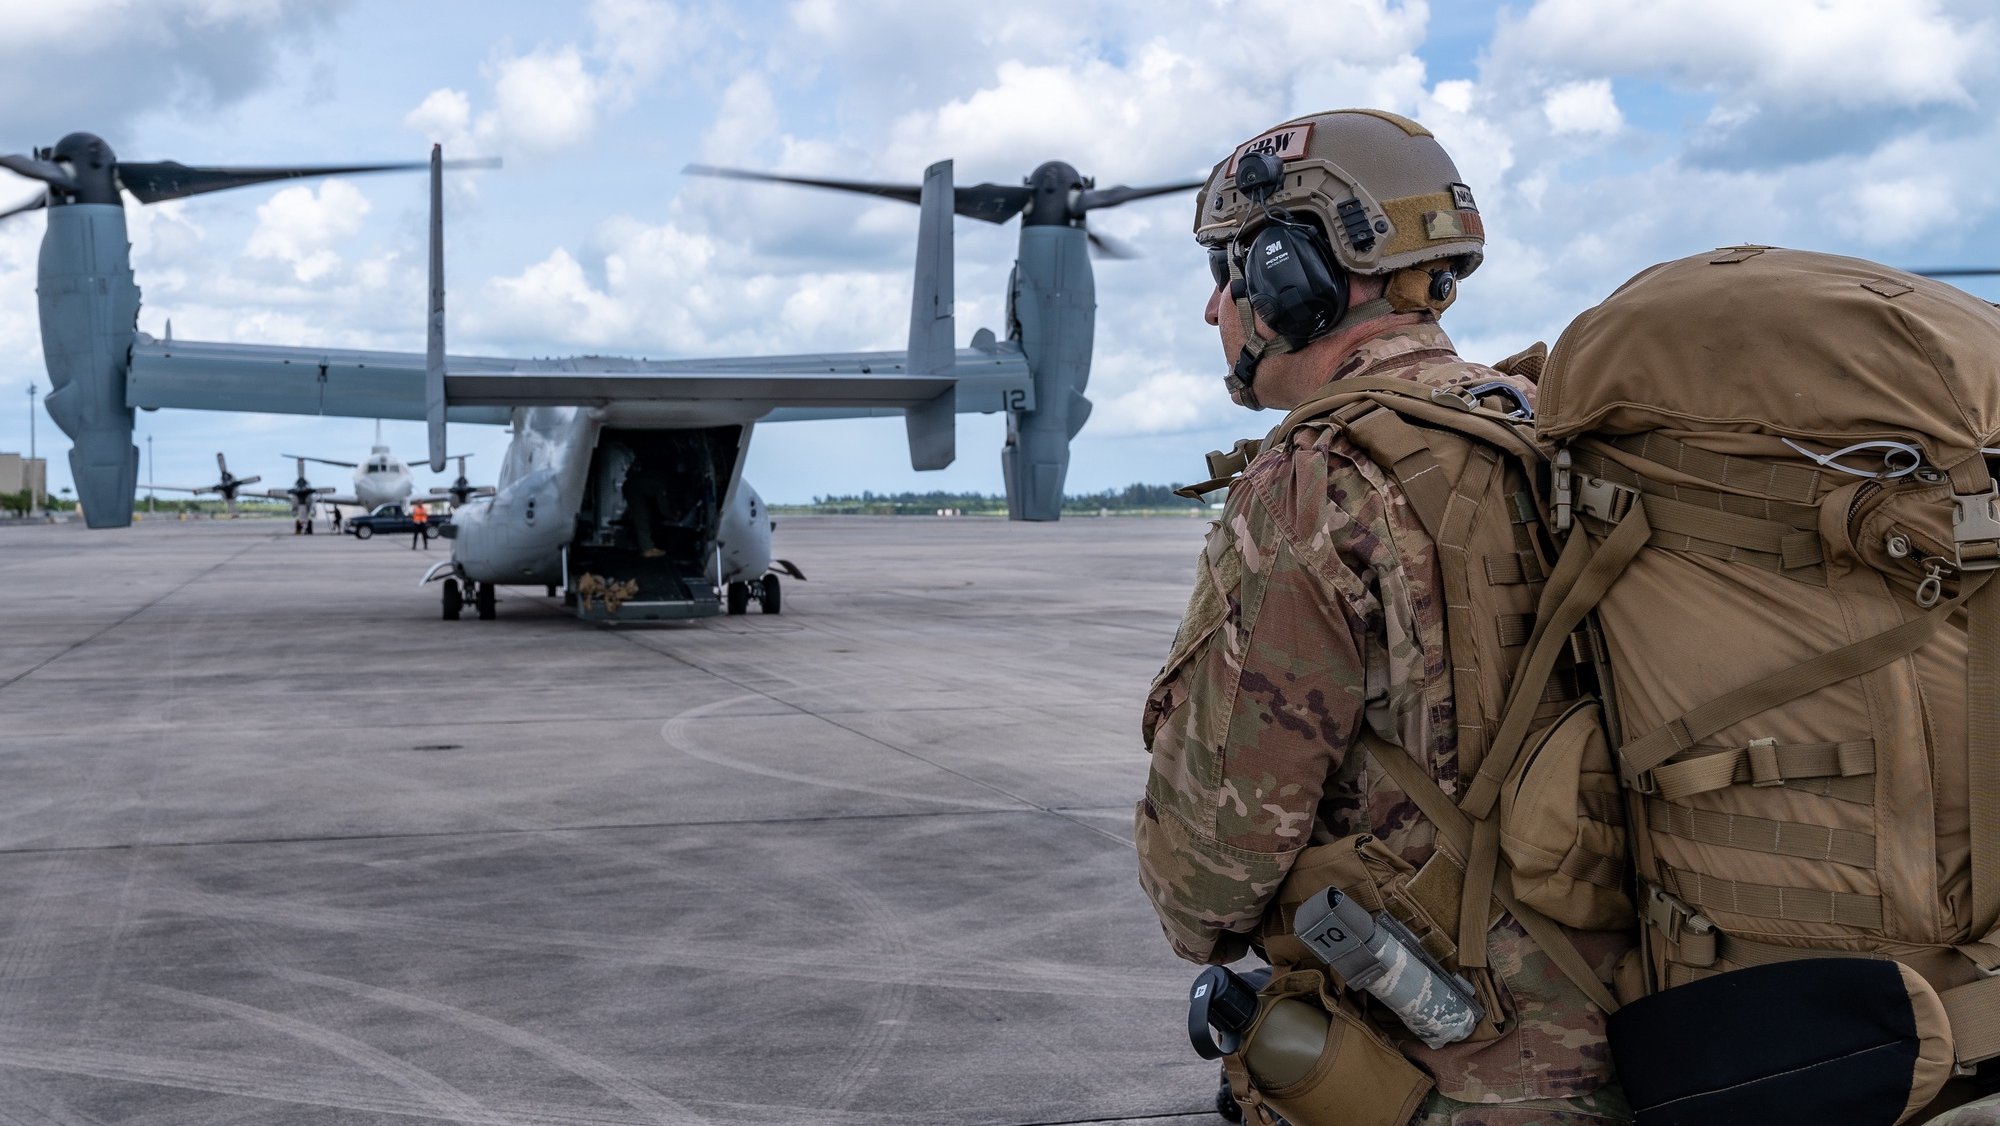 epa07818190 A handout photo made available by the Defense Visual Information Distribution Service shows shows an Airman from the US Air Force&#039;s Crisis Response Group preparing to board a Marine Corps MV-22 Osprey for disaster relief efforts in the Bahamas, at Homestead Air Reserve Base in Florida, USA 04 September 2019.  EPA/LIONEL CASTELLANO HANDOUT  HANDOUT EDITORIAL USE ONLY/NO SALES